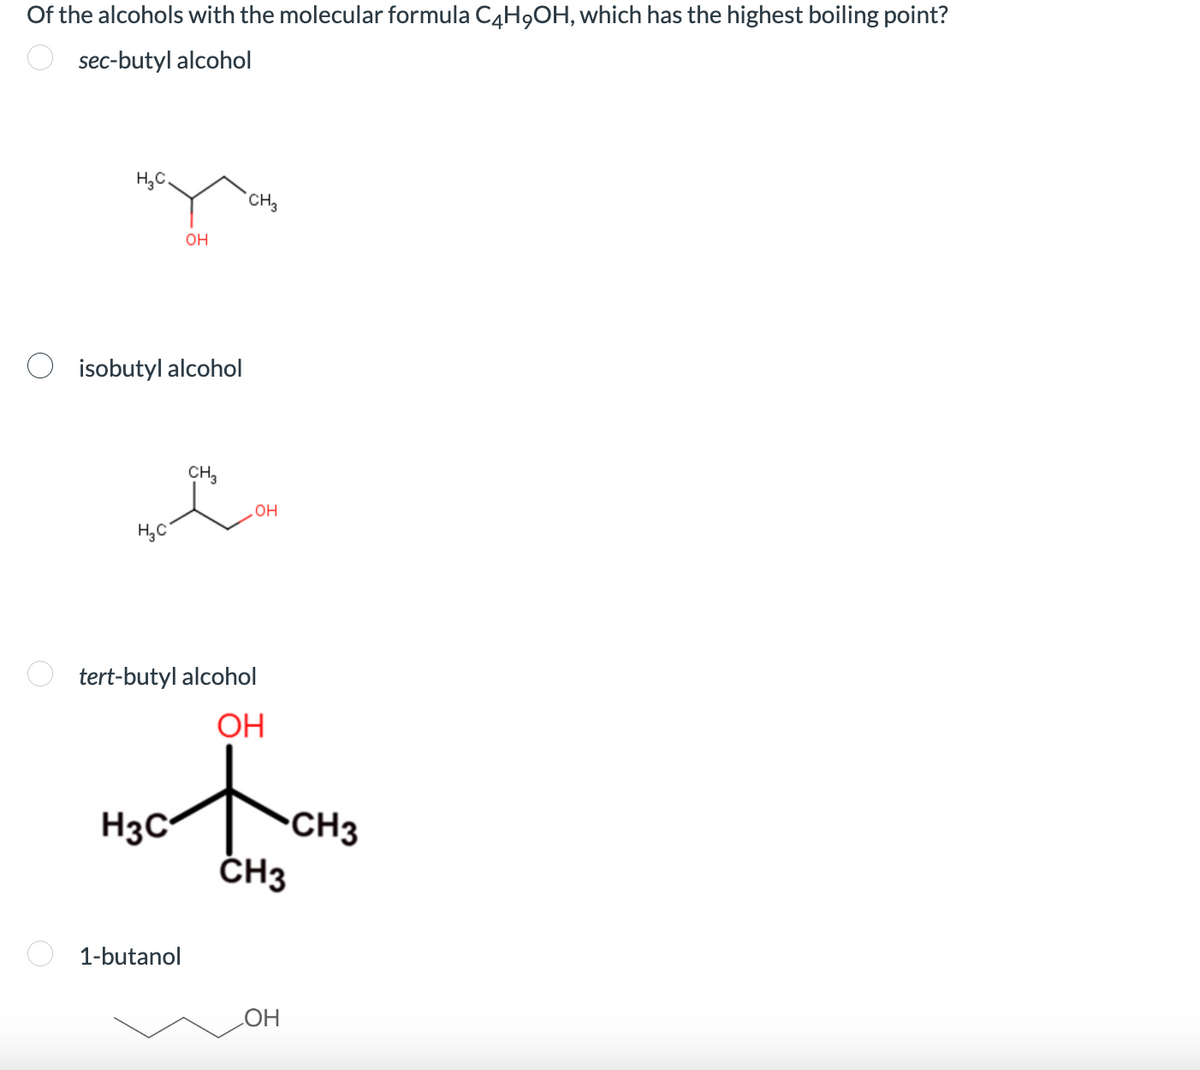 Of the alcohols with the molecular formula C4H₂OH, which has the highest boiling point?
sec-butyl alcohol
H.C.
isobutyl alcohol
Н.С
OH
H3C
1-butanol
CH3
CH3
tert-butyl alcohol
ОН
OH
CH3
OH
CH3